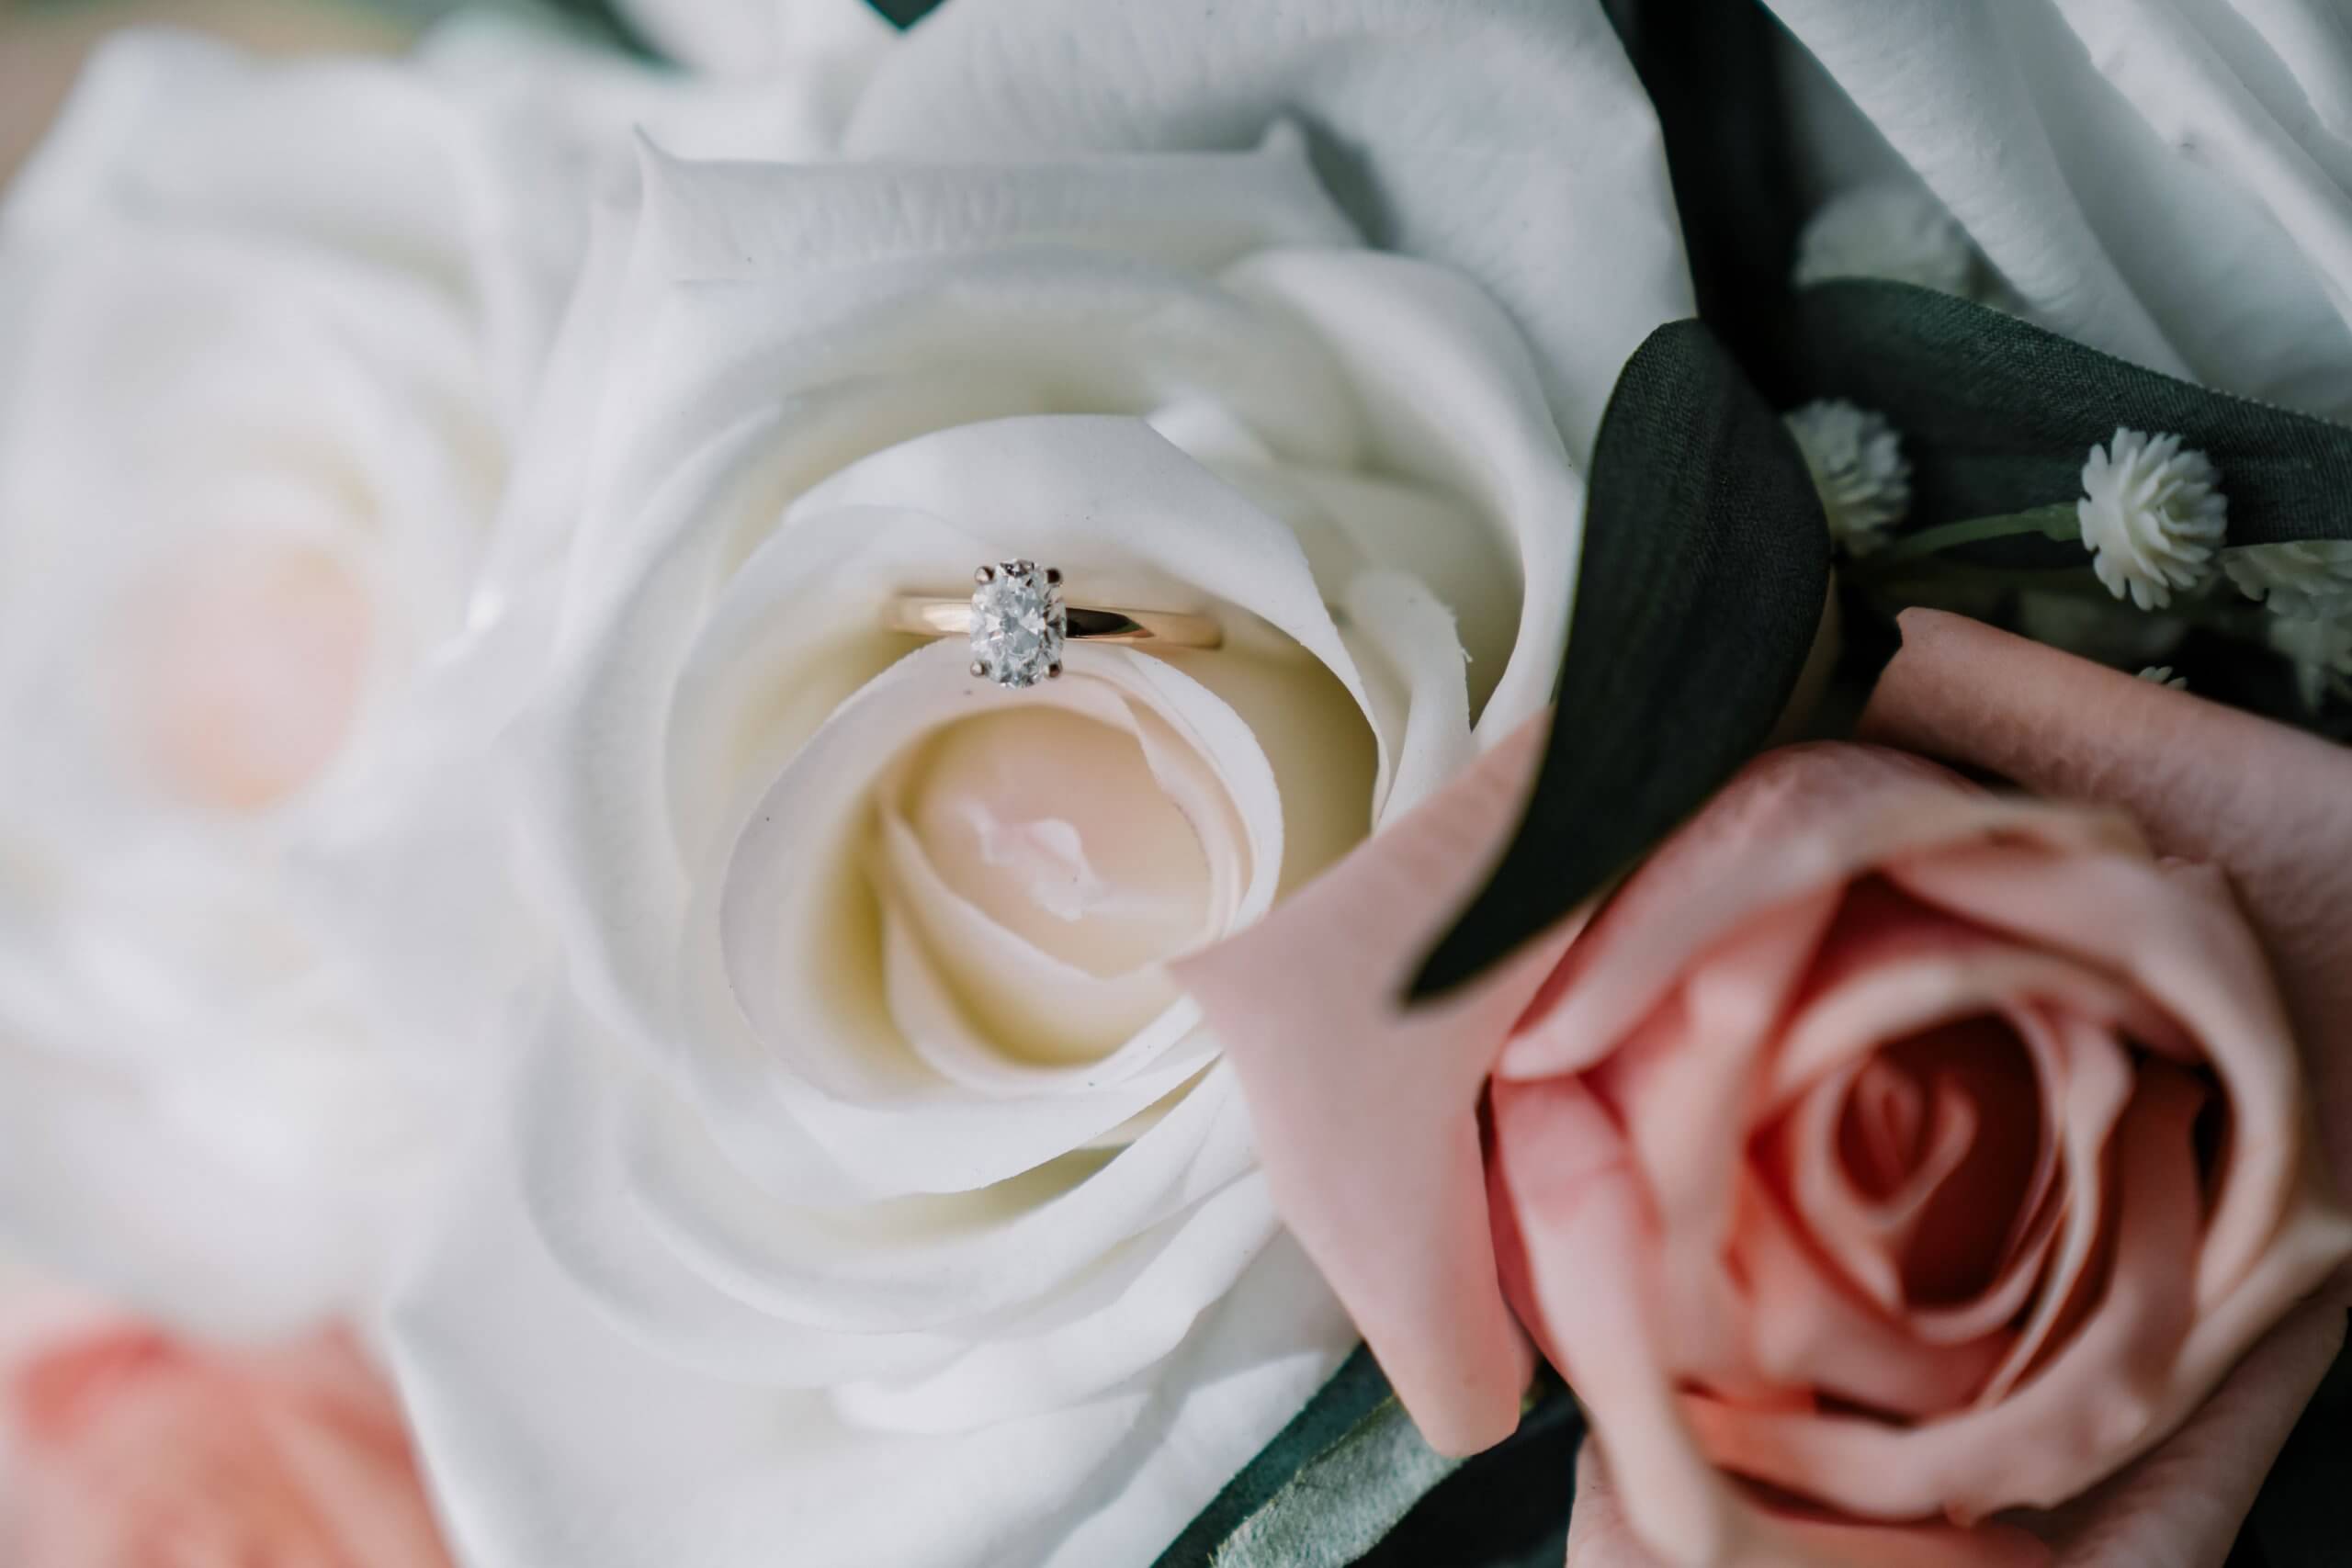 A golden engagement ring, encrusted with a large diamond, sits beautifully on white and pink roses.